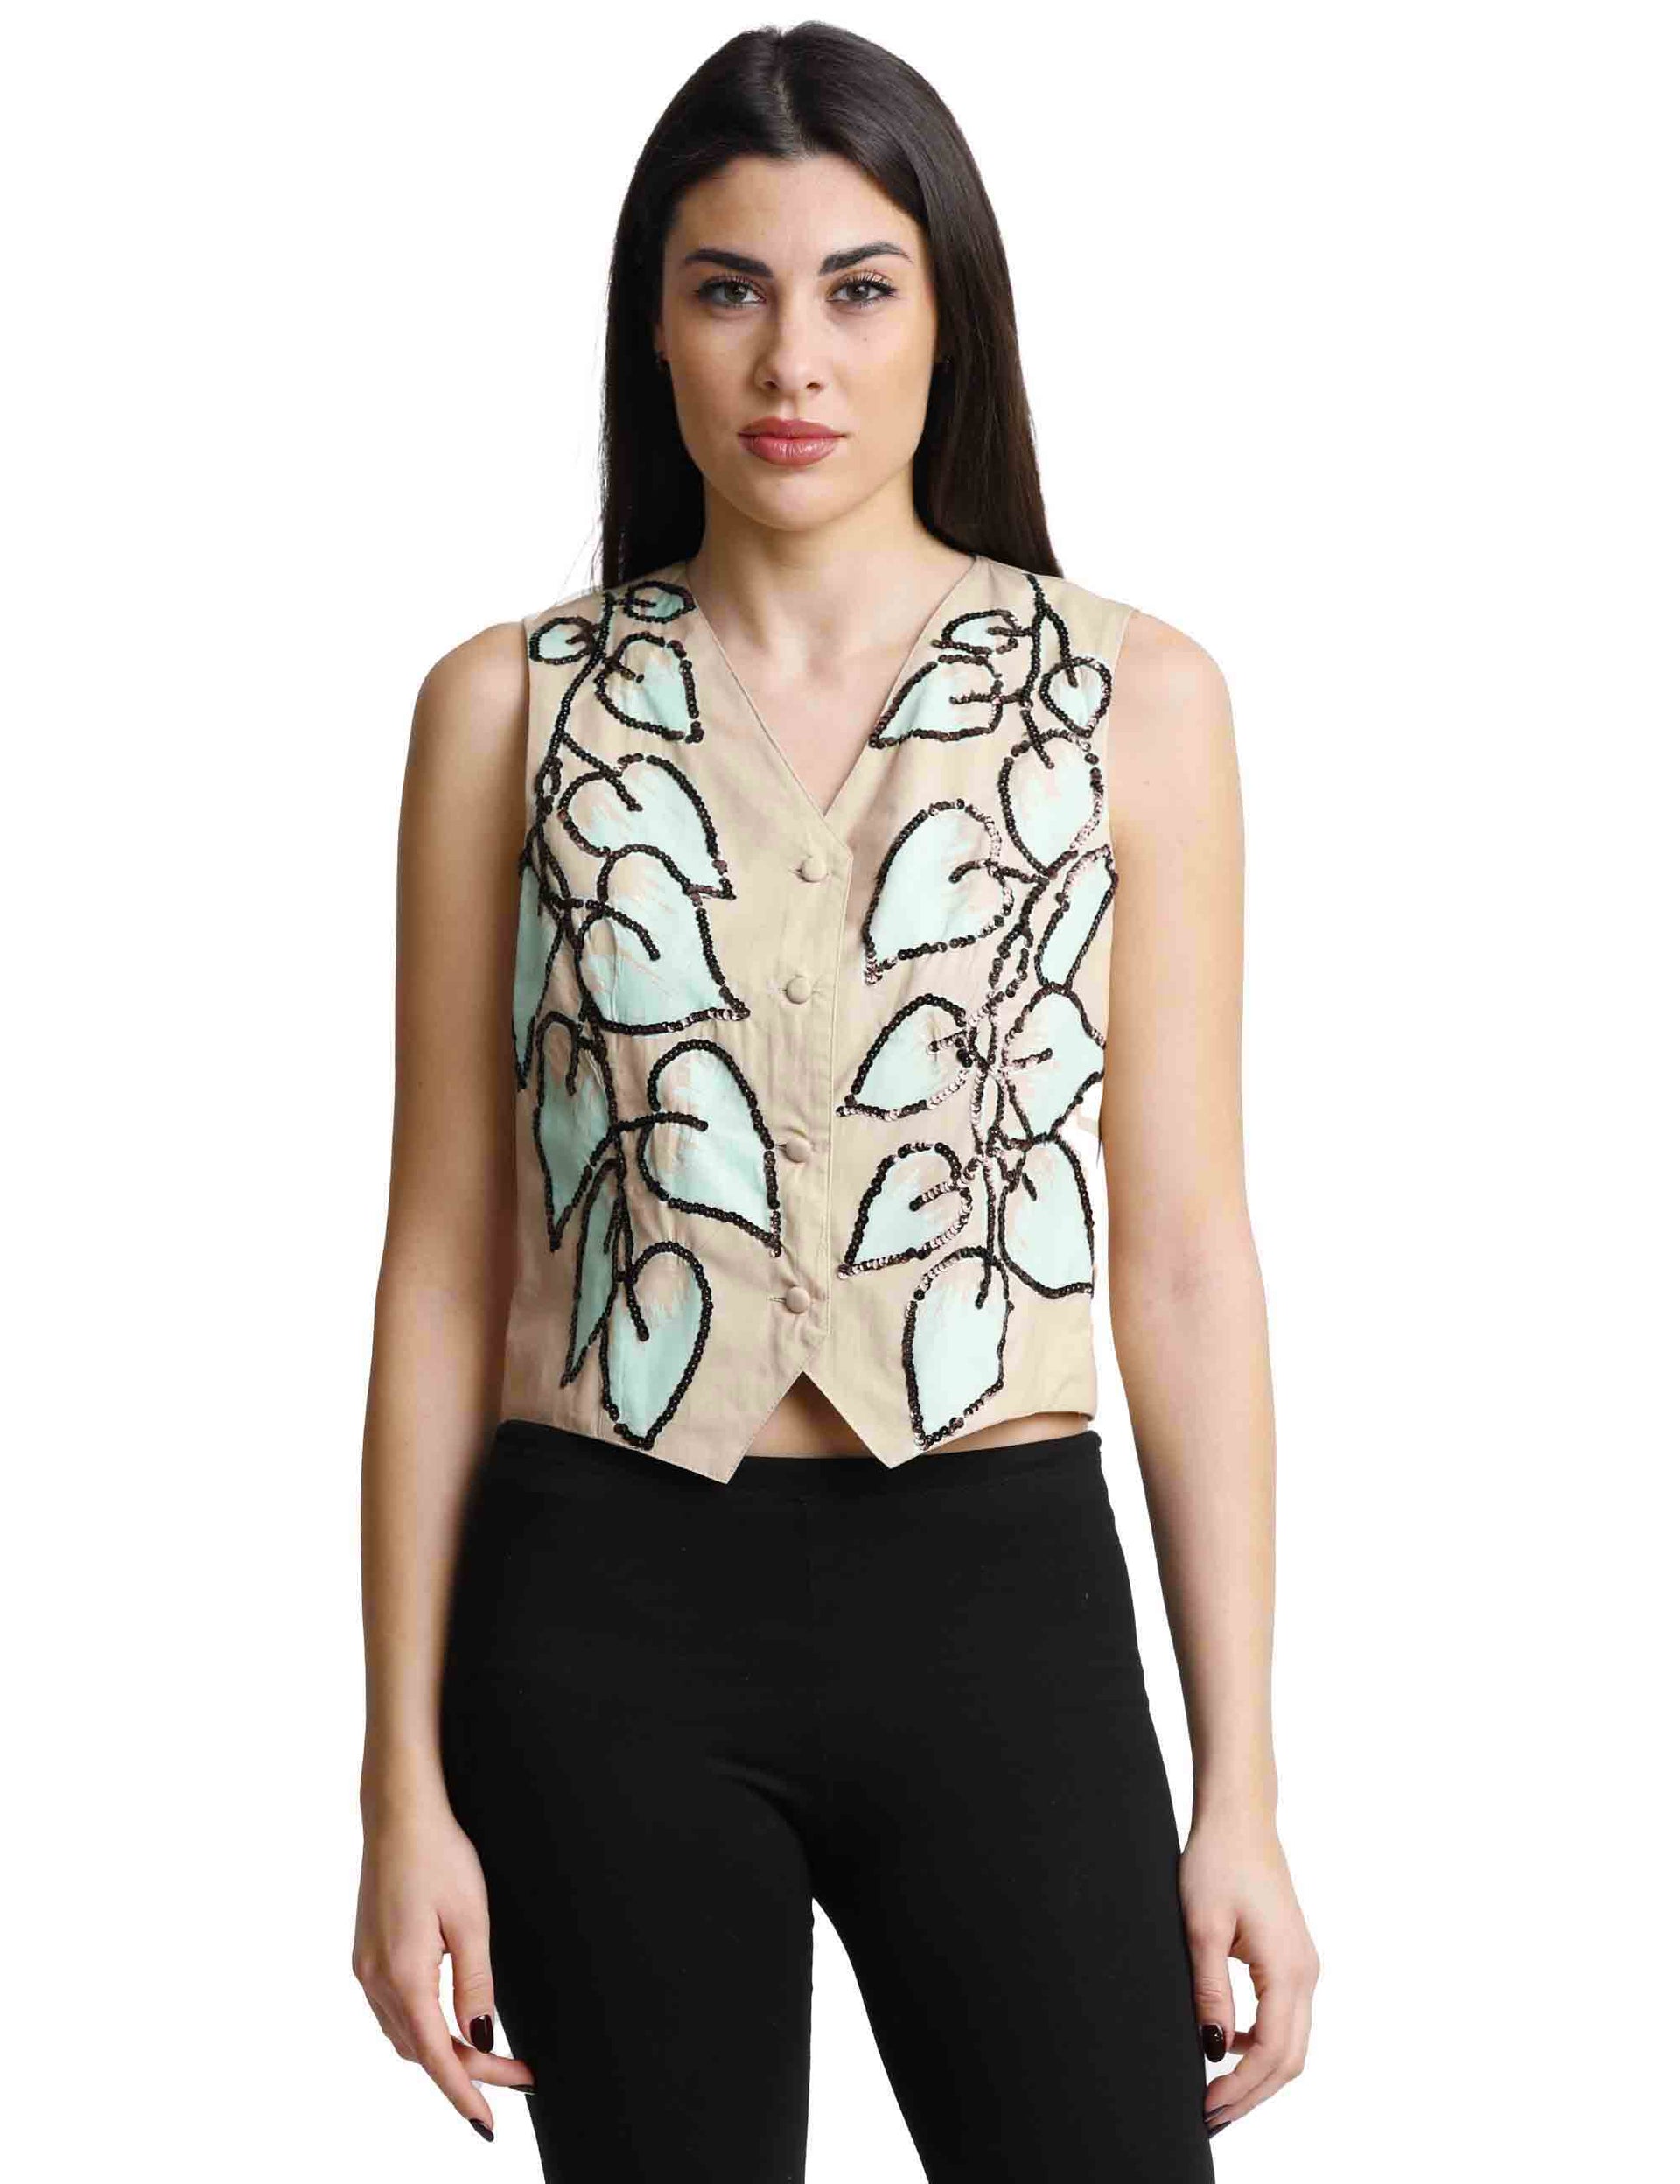 Archive Leaf Embroidery women's vest in beige and green cotton